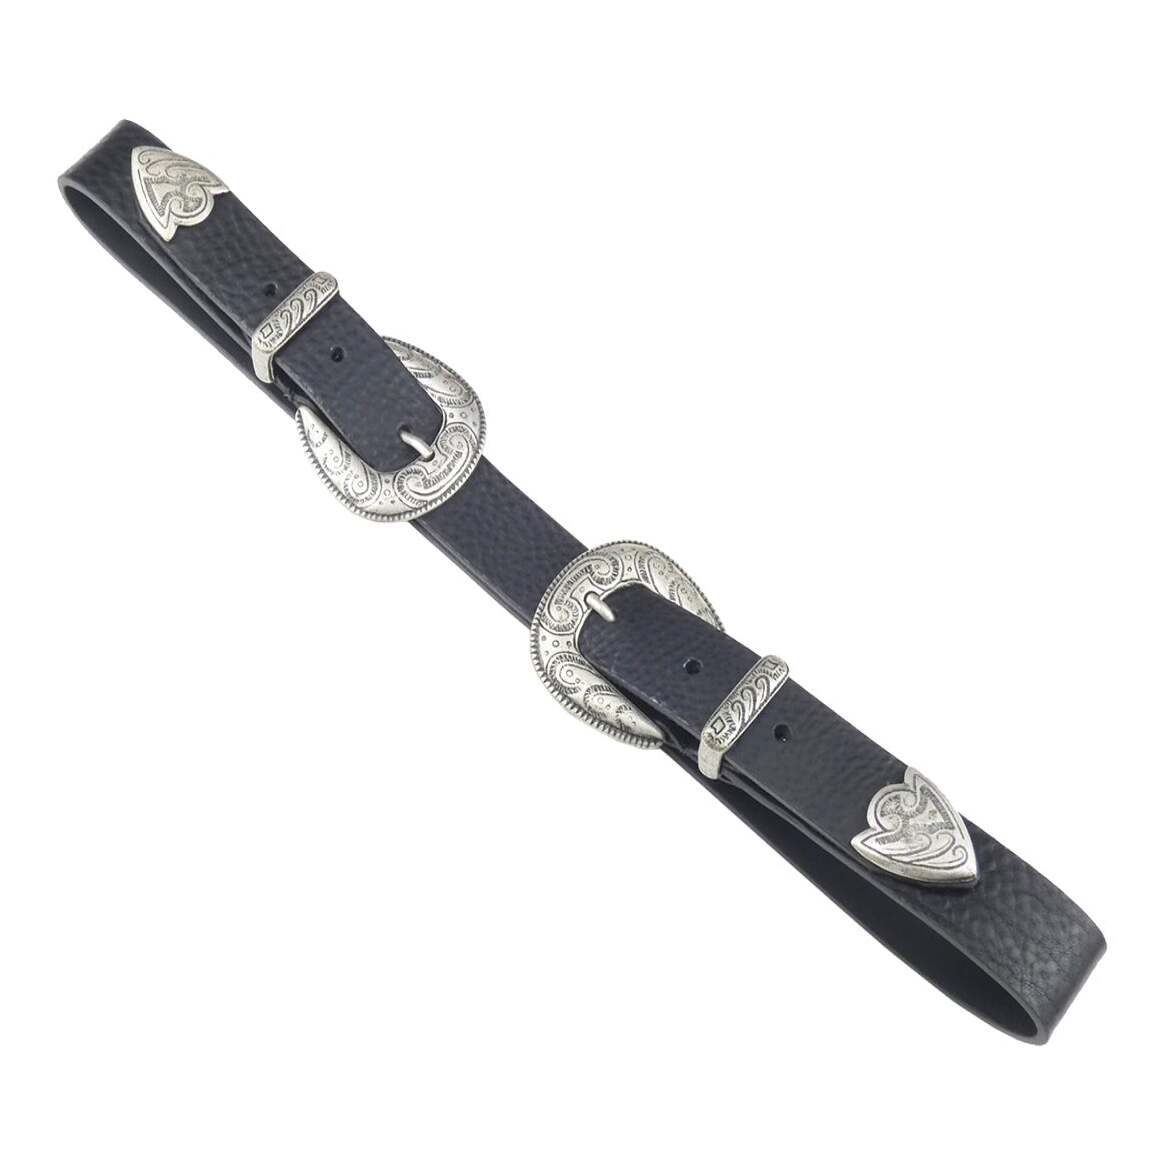 Michelangelo leather belt with double buckle tip and antique silver zamak loop